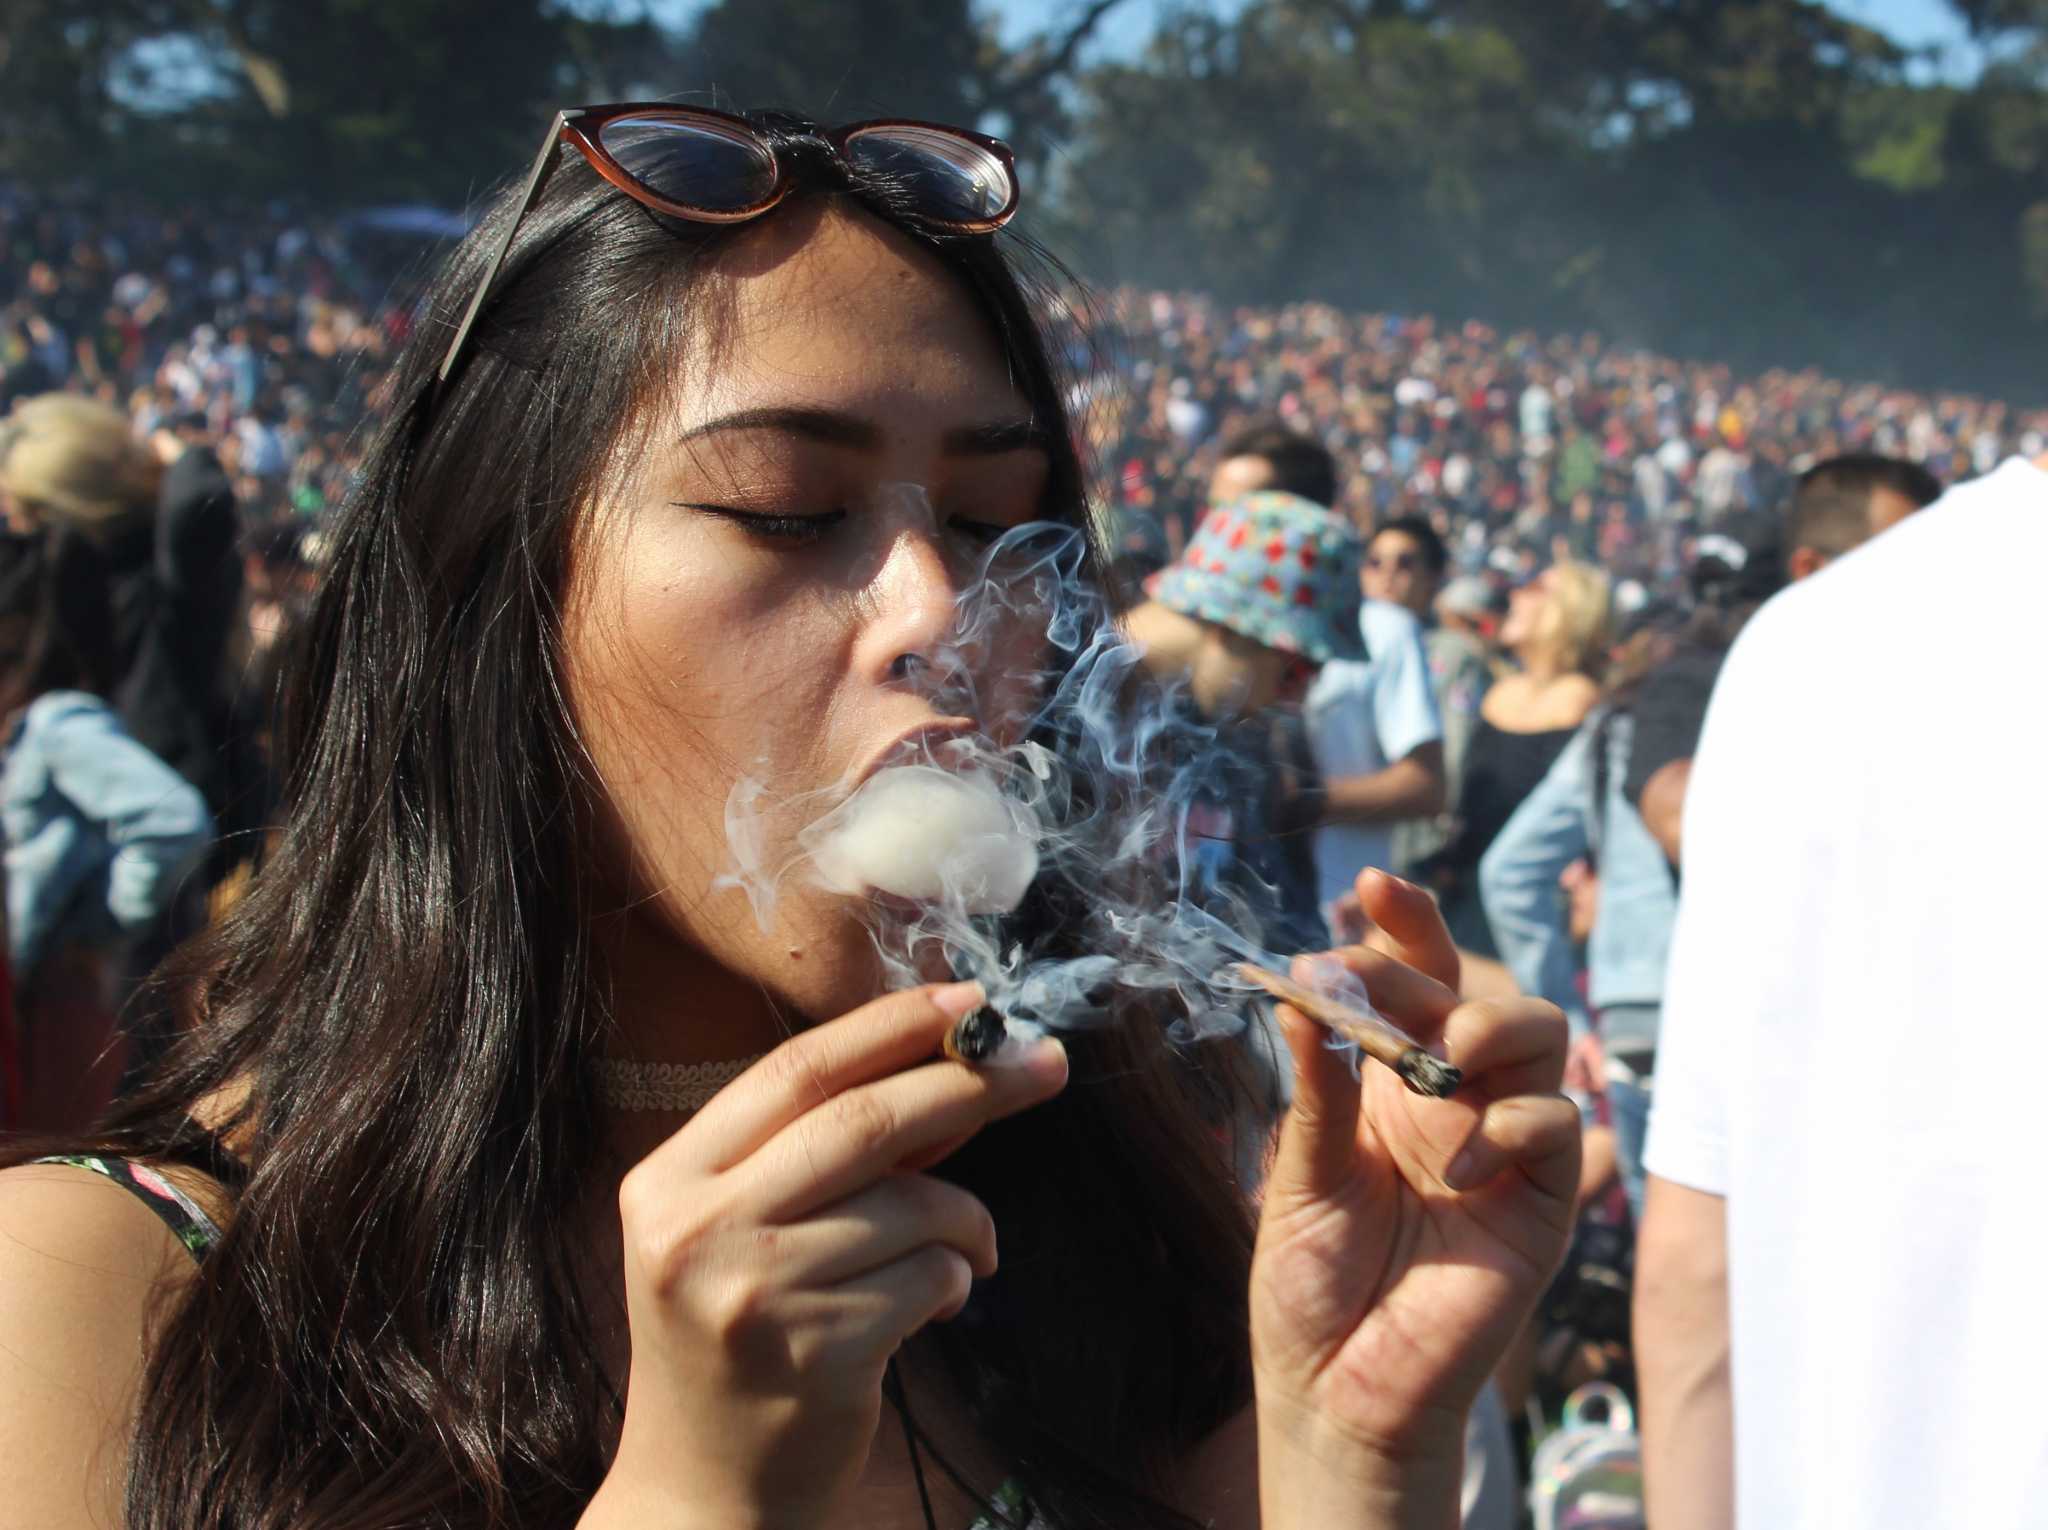 City permits and sponsorship can’t kill the Hippie Hill 420 vibe